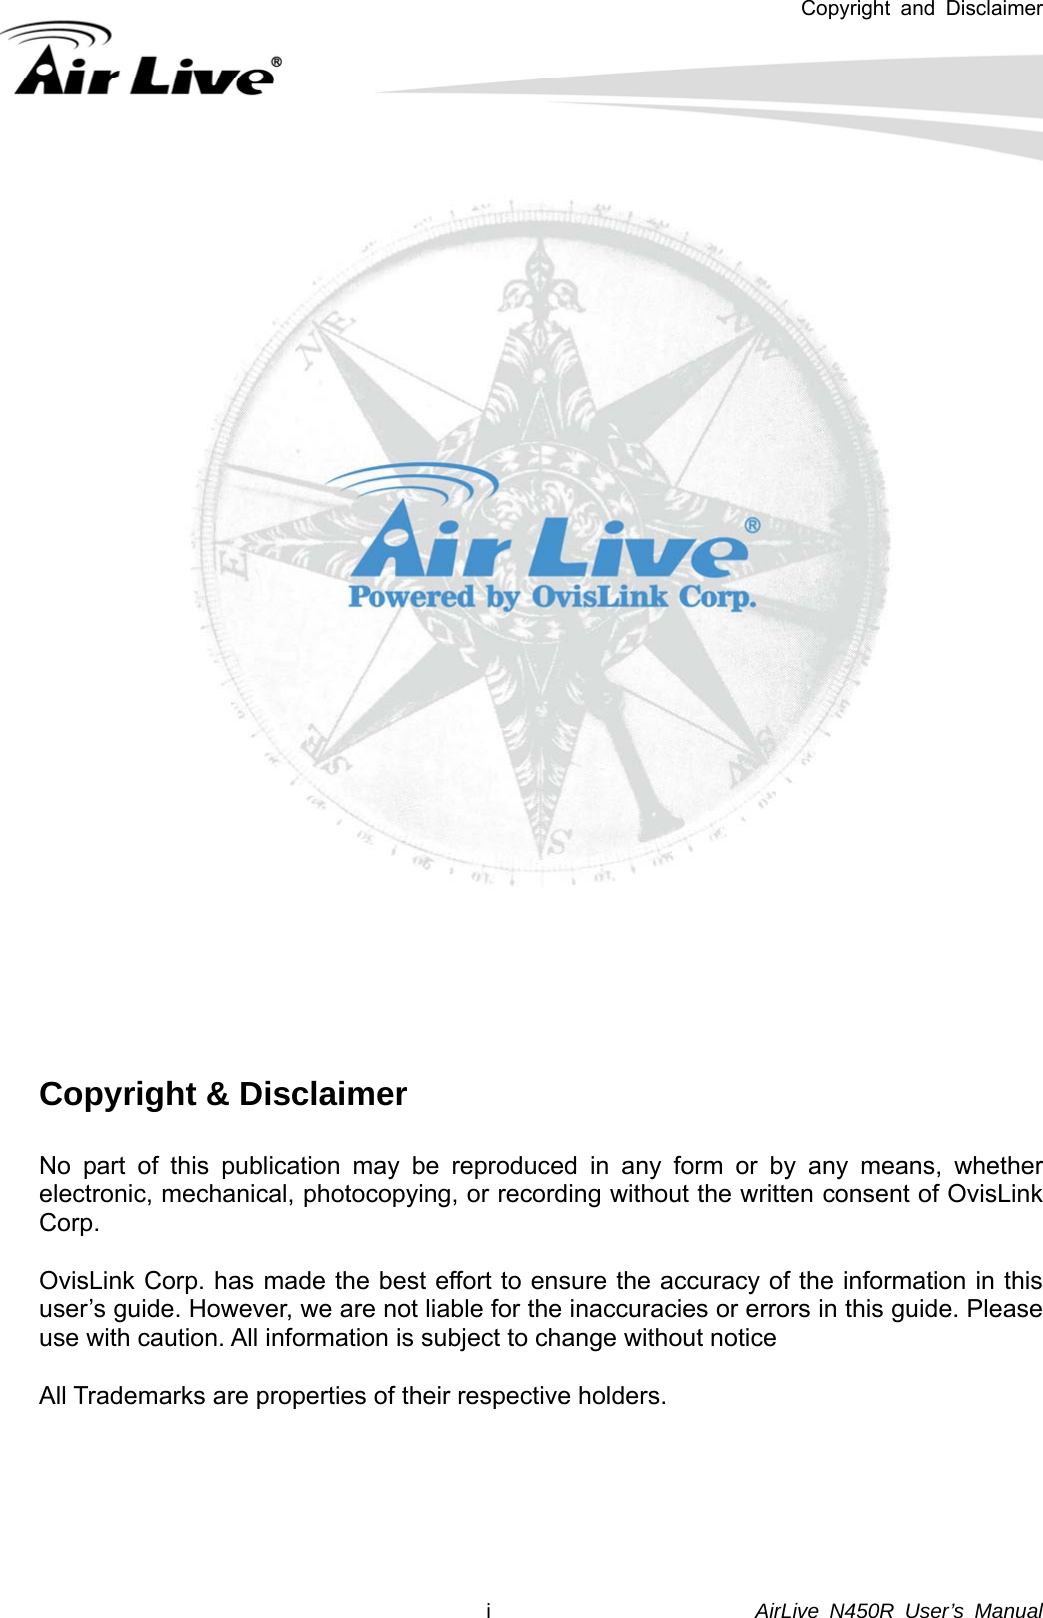 Copyright and Disclaimer        AirLive N450R User’s Manual  i      Copyright &amp; Disclaimer  No part of this publication may be reproduced in any form or by any means, whether electronic, mechanical, photocopying, or recording without the written consent of OvisLink Corp.   OvisLink Corp. has made the best effort to ensure the accuracy of the information in this user’s guide. However, we are not liable for the inaccuracies or errors in this guide. Please use with caution. All information is subject to change without notice  All Trademarks are properties of their respective holders.     